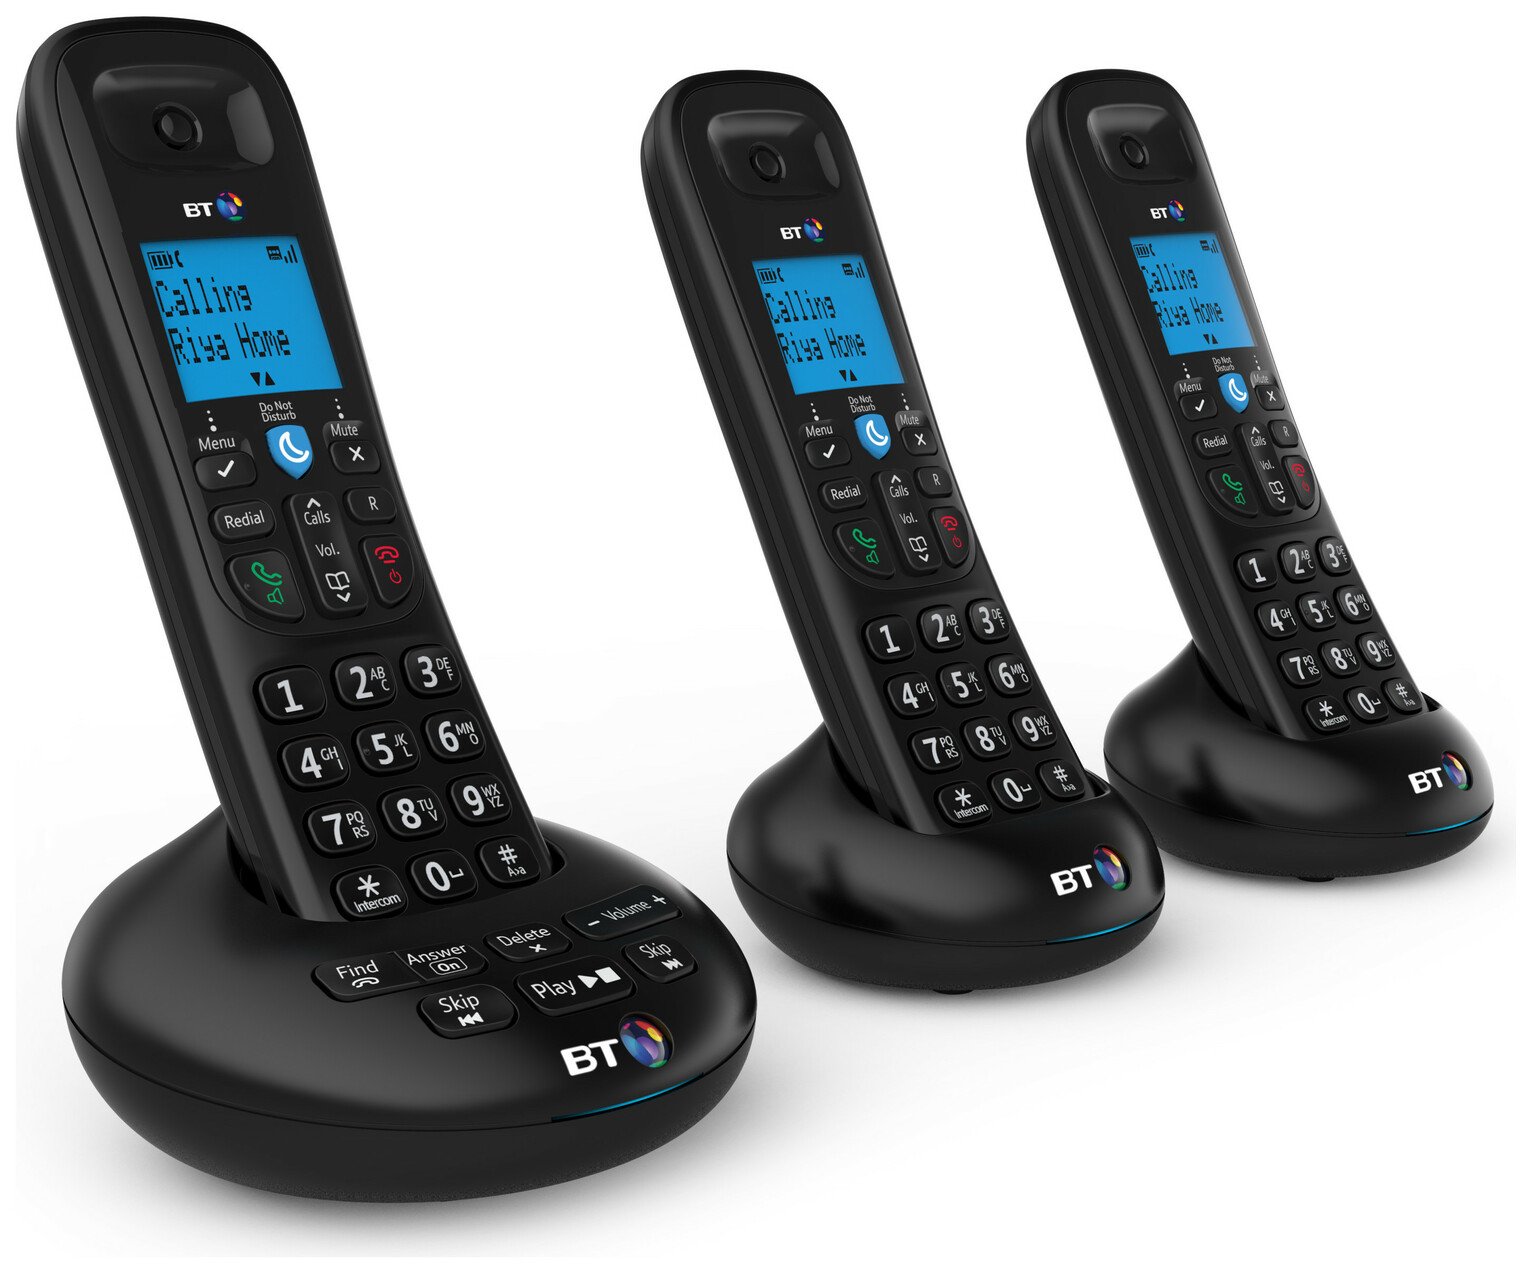 BT 3570 Cordless Telephone with Answer Machine Review